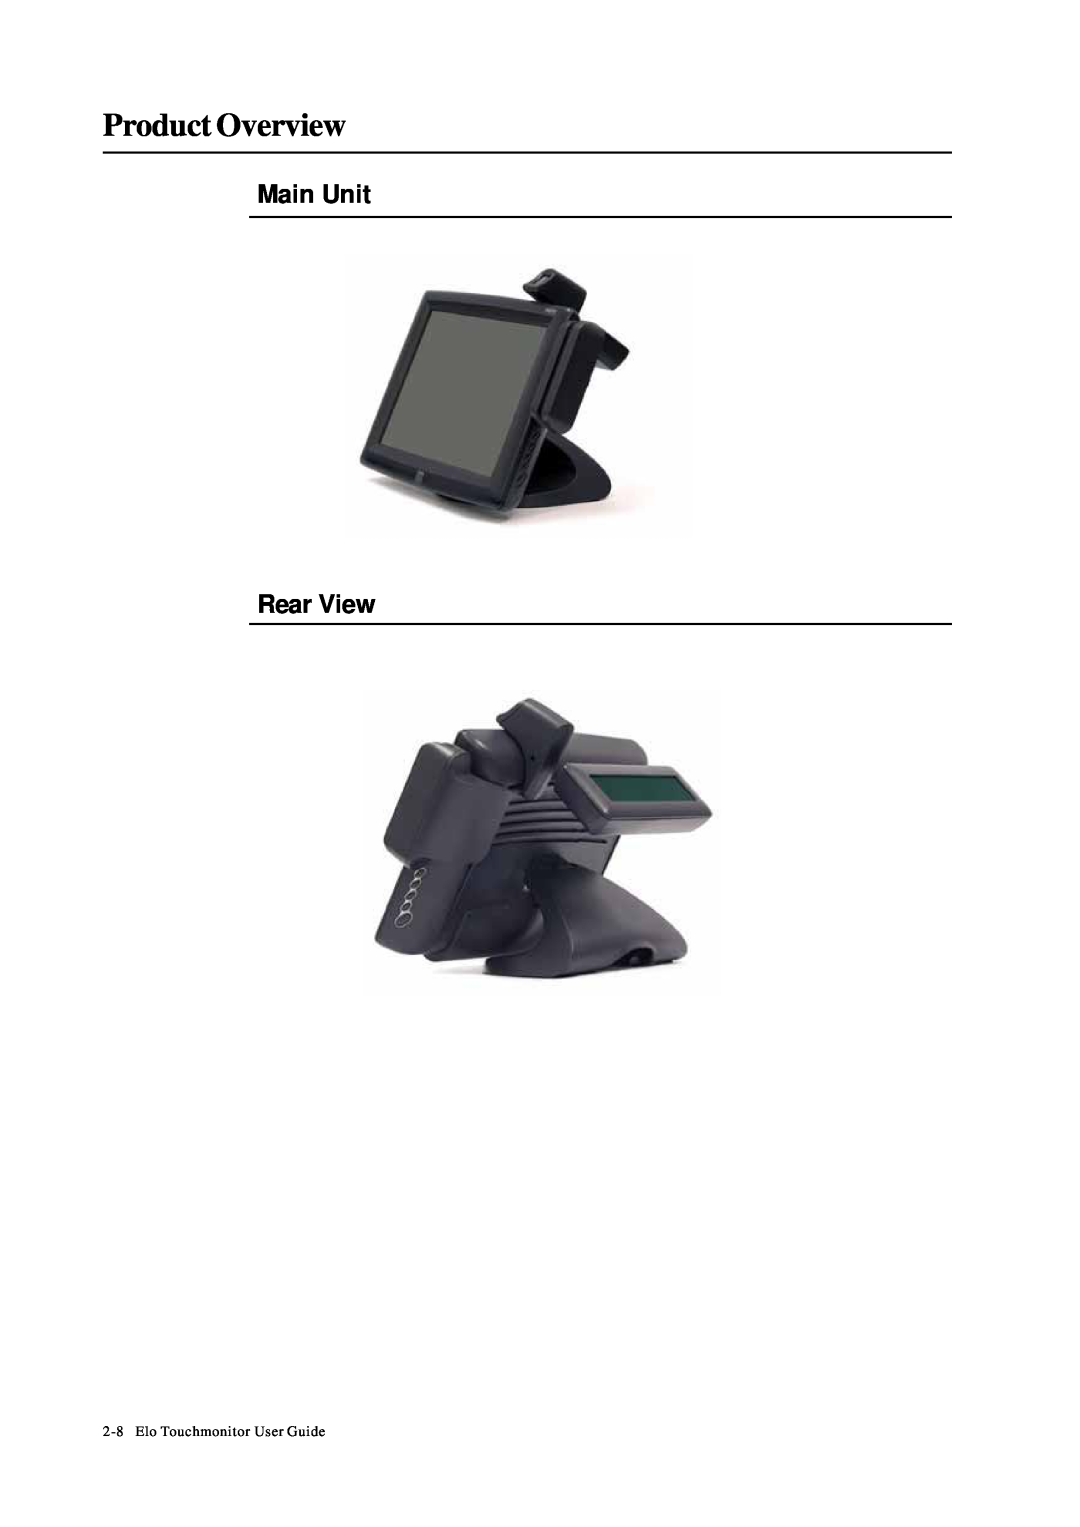 Tyco Electronics 1229L manual Main Unit Rear View, Product Overview, Elo Touchmonitor User Guide 